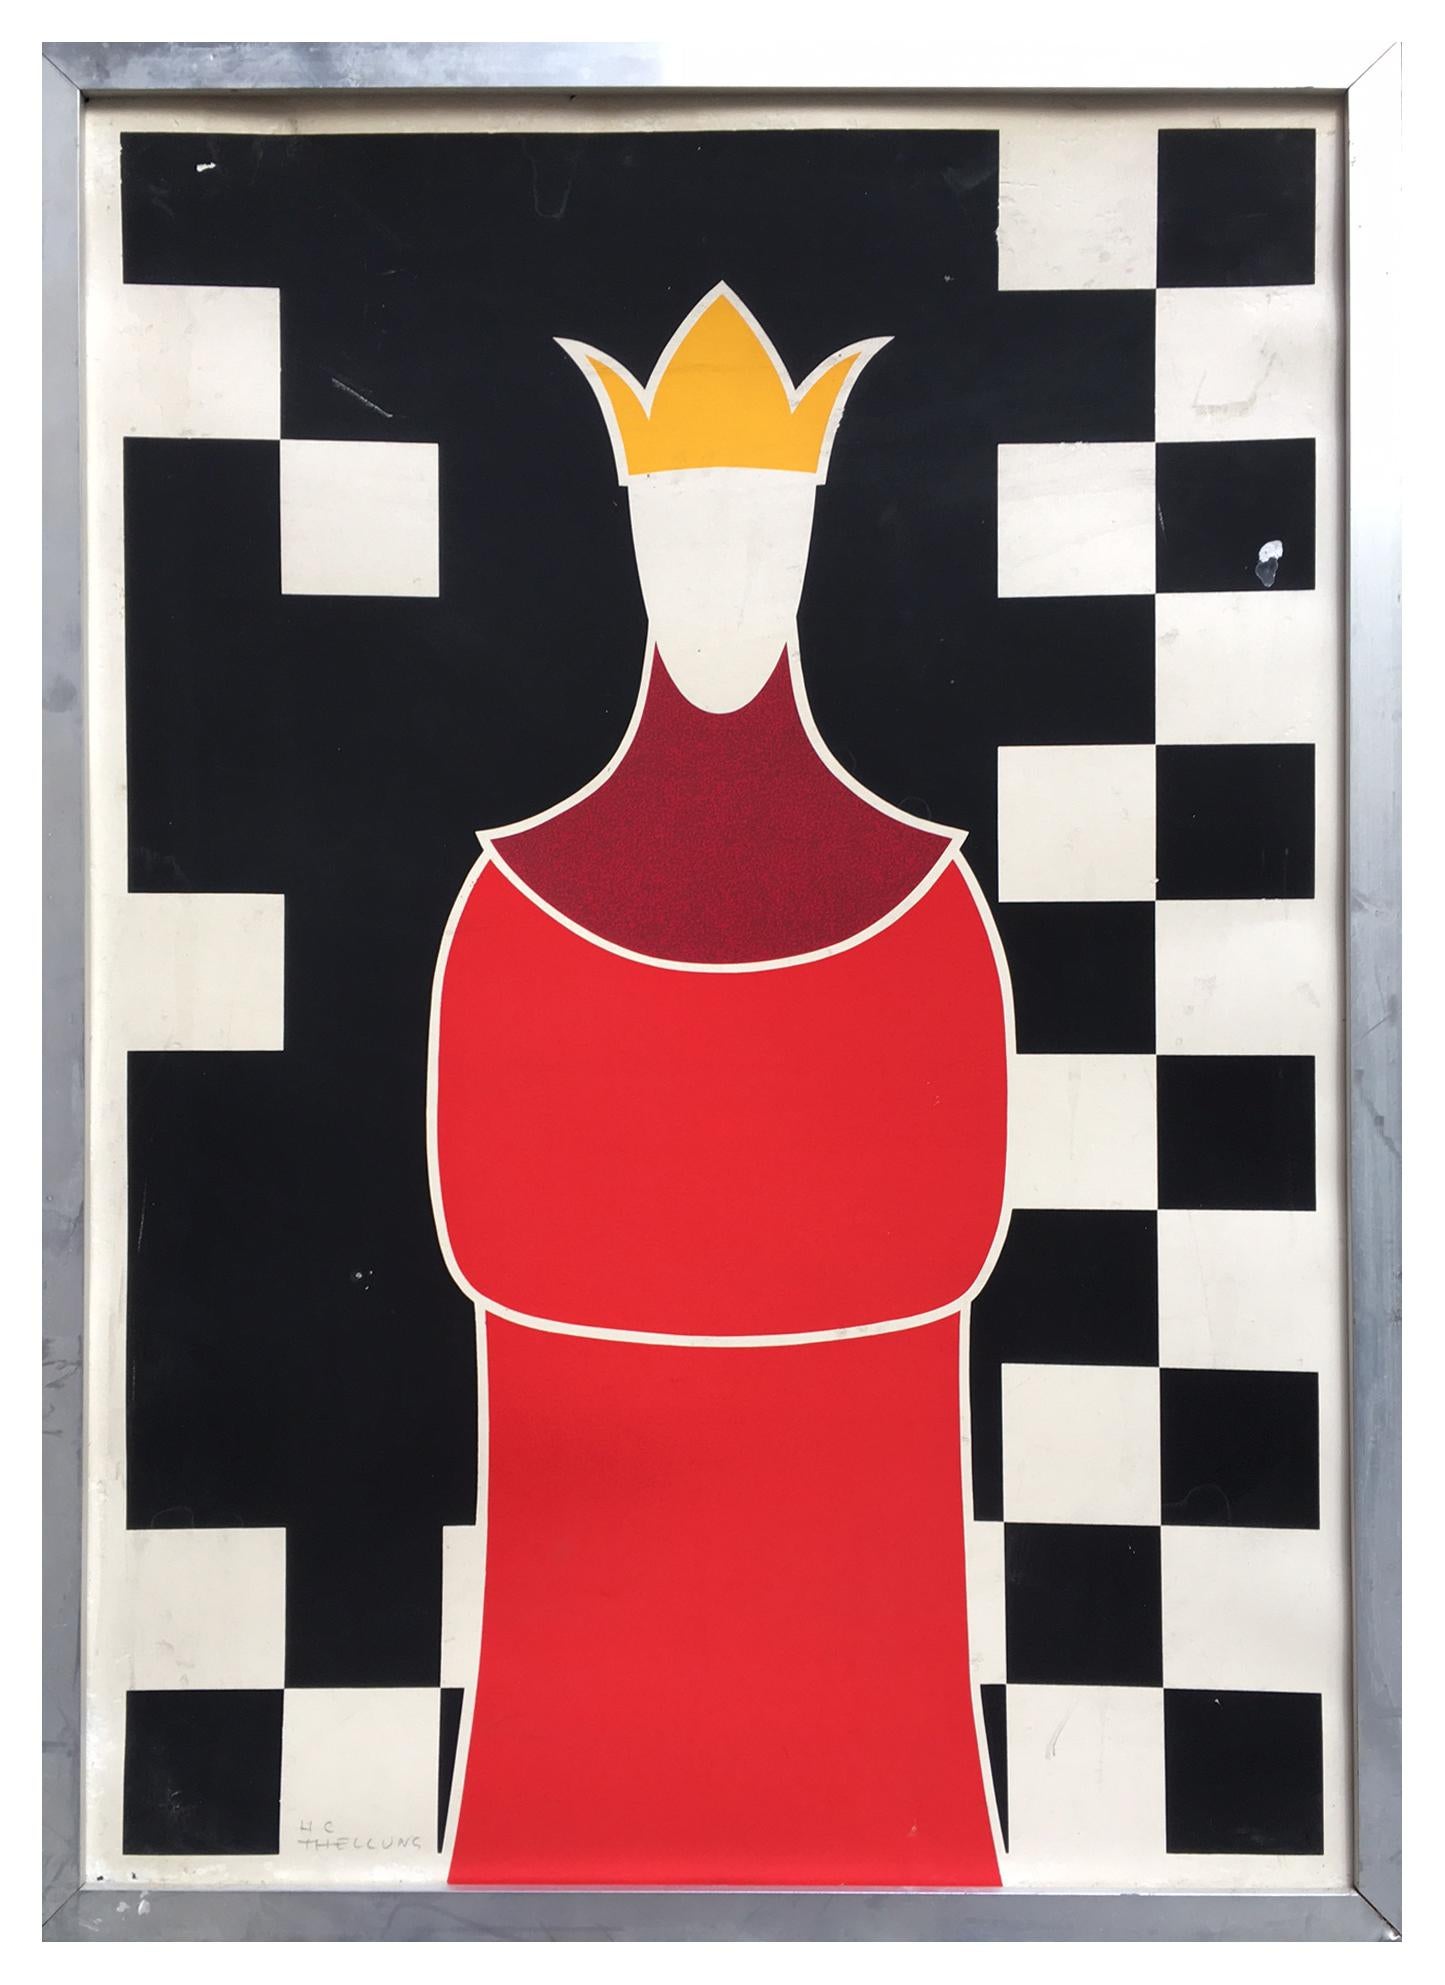 Unknown Figurative Print - THE KING - H.C. color screenprint signed Antonio Thellung